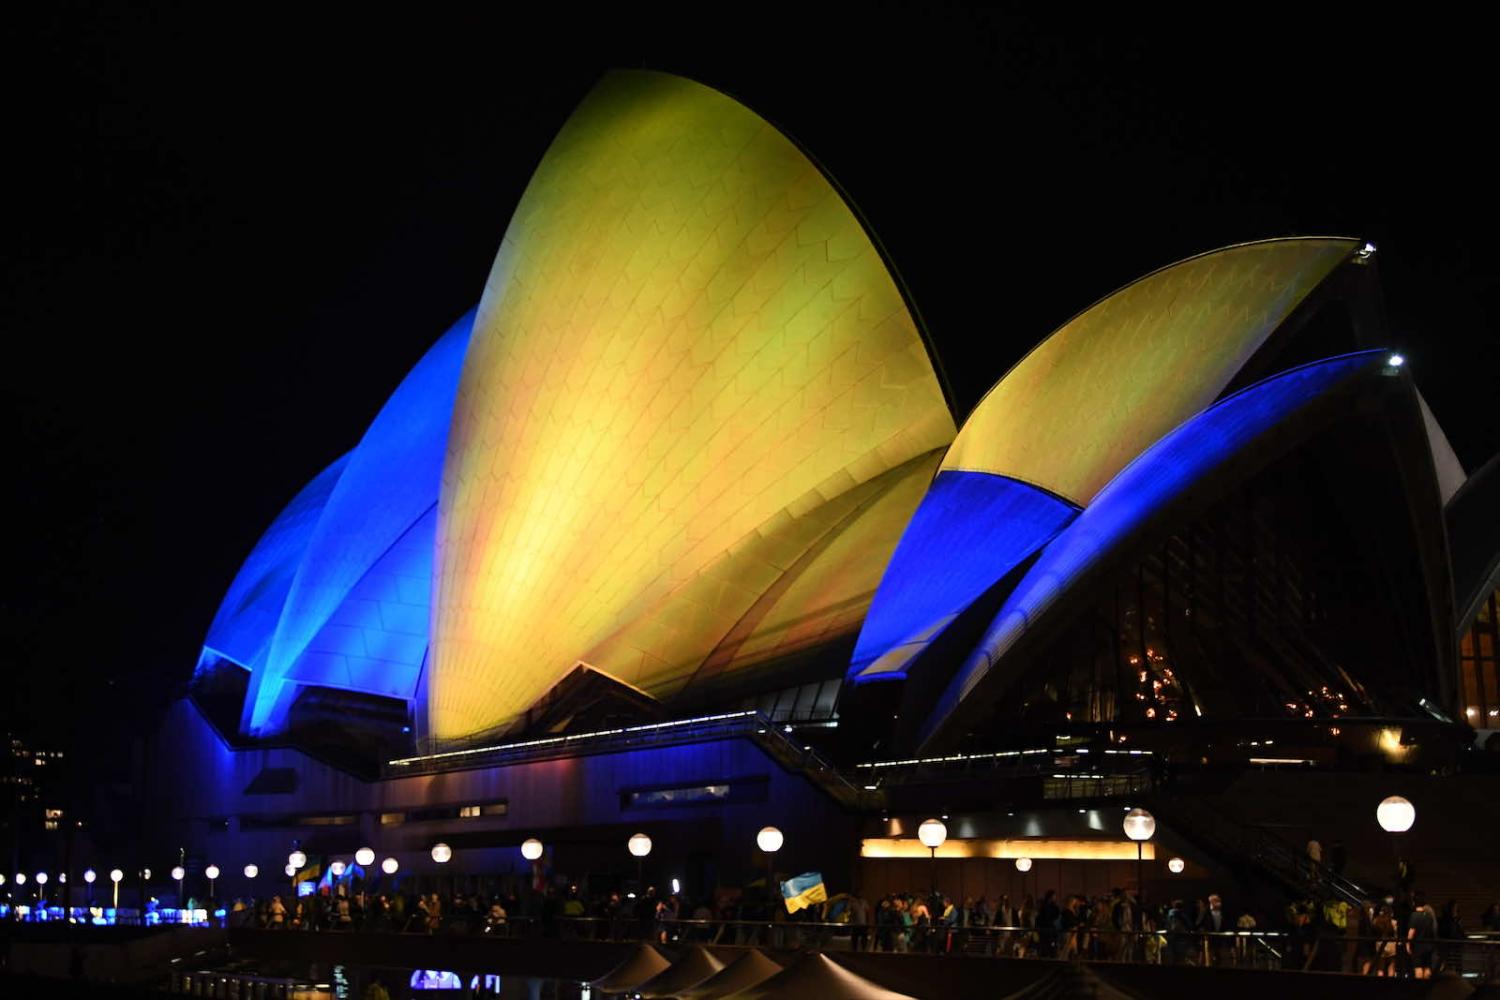 The Sydney Opera House sails are illuminated in yellow and blue to show support for Ukraine after Russian forces invaded the country (James D. Morgan/Getty Images)